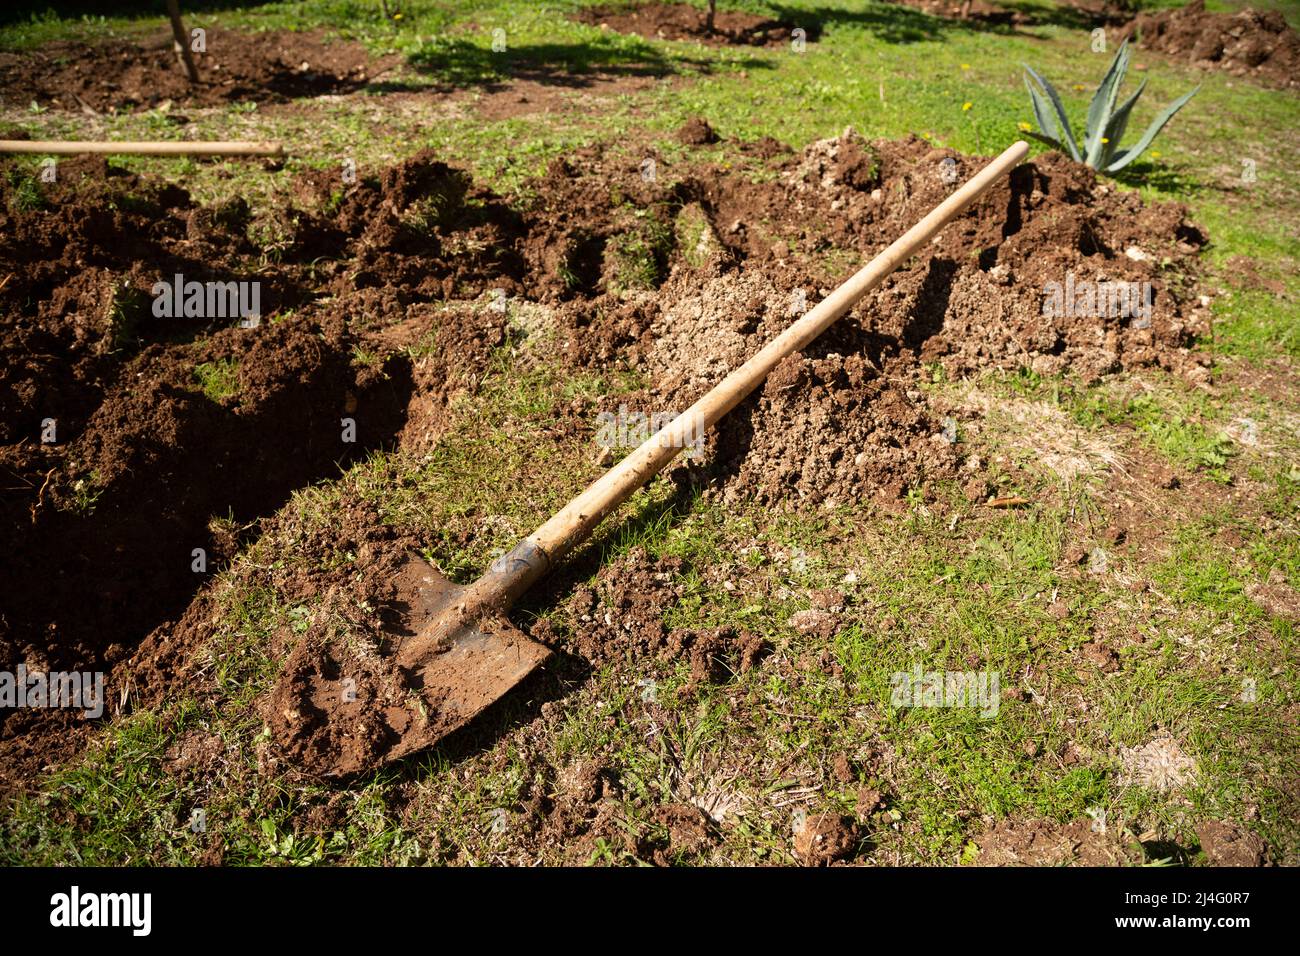 Selective focus of farming shovel on pitted soil. There is fresh soil on a used farming shovel. Gardening, spring, agriculture concept. Stock Photo